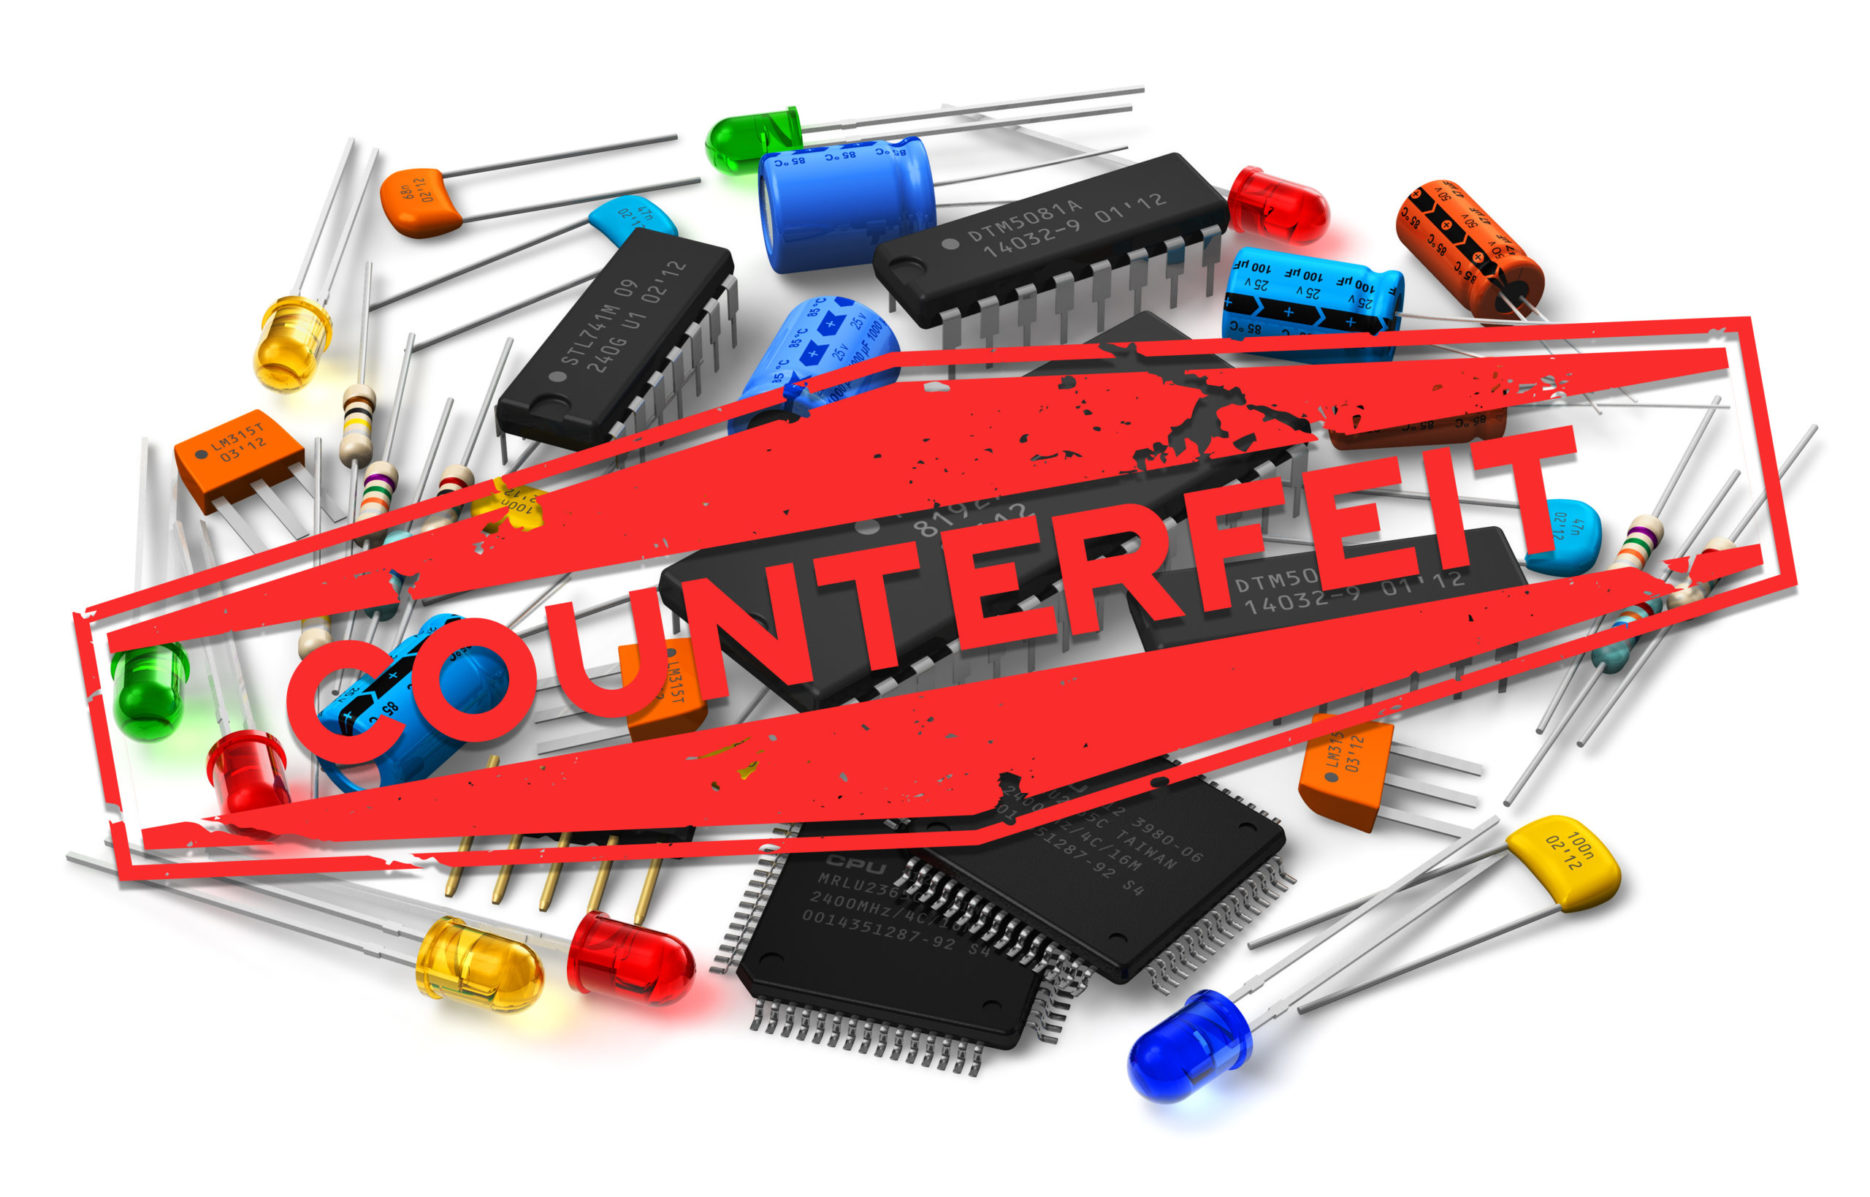 More counterfeits in your supply chain?